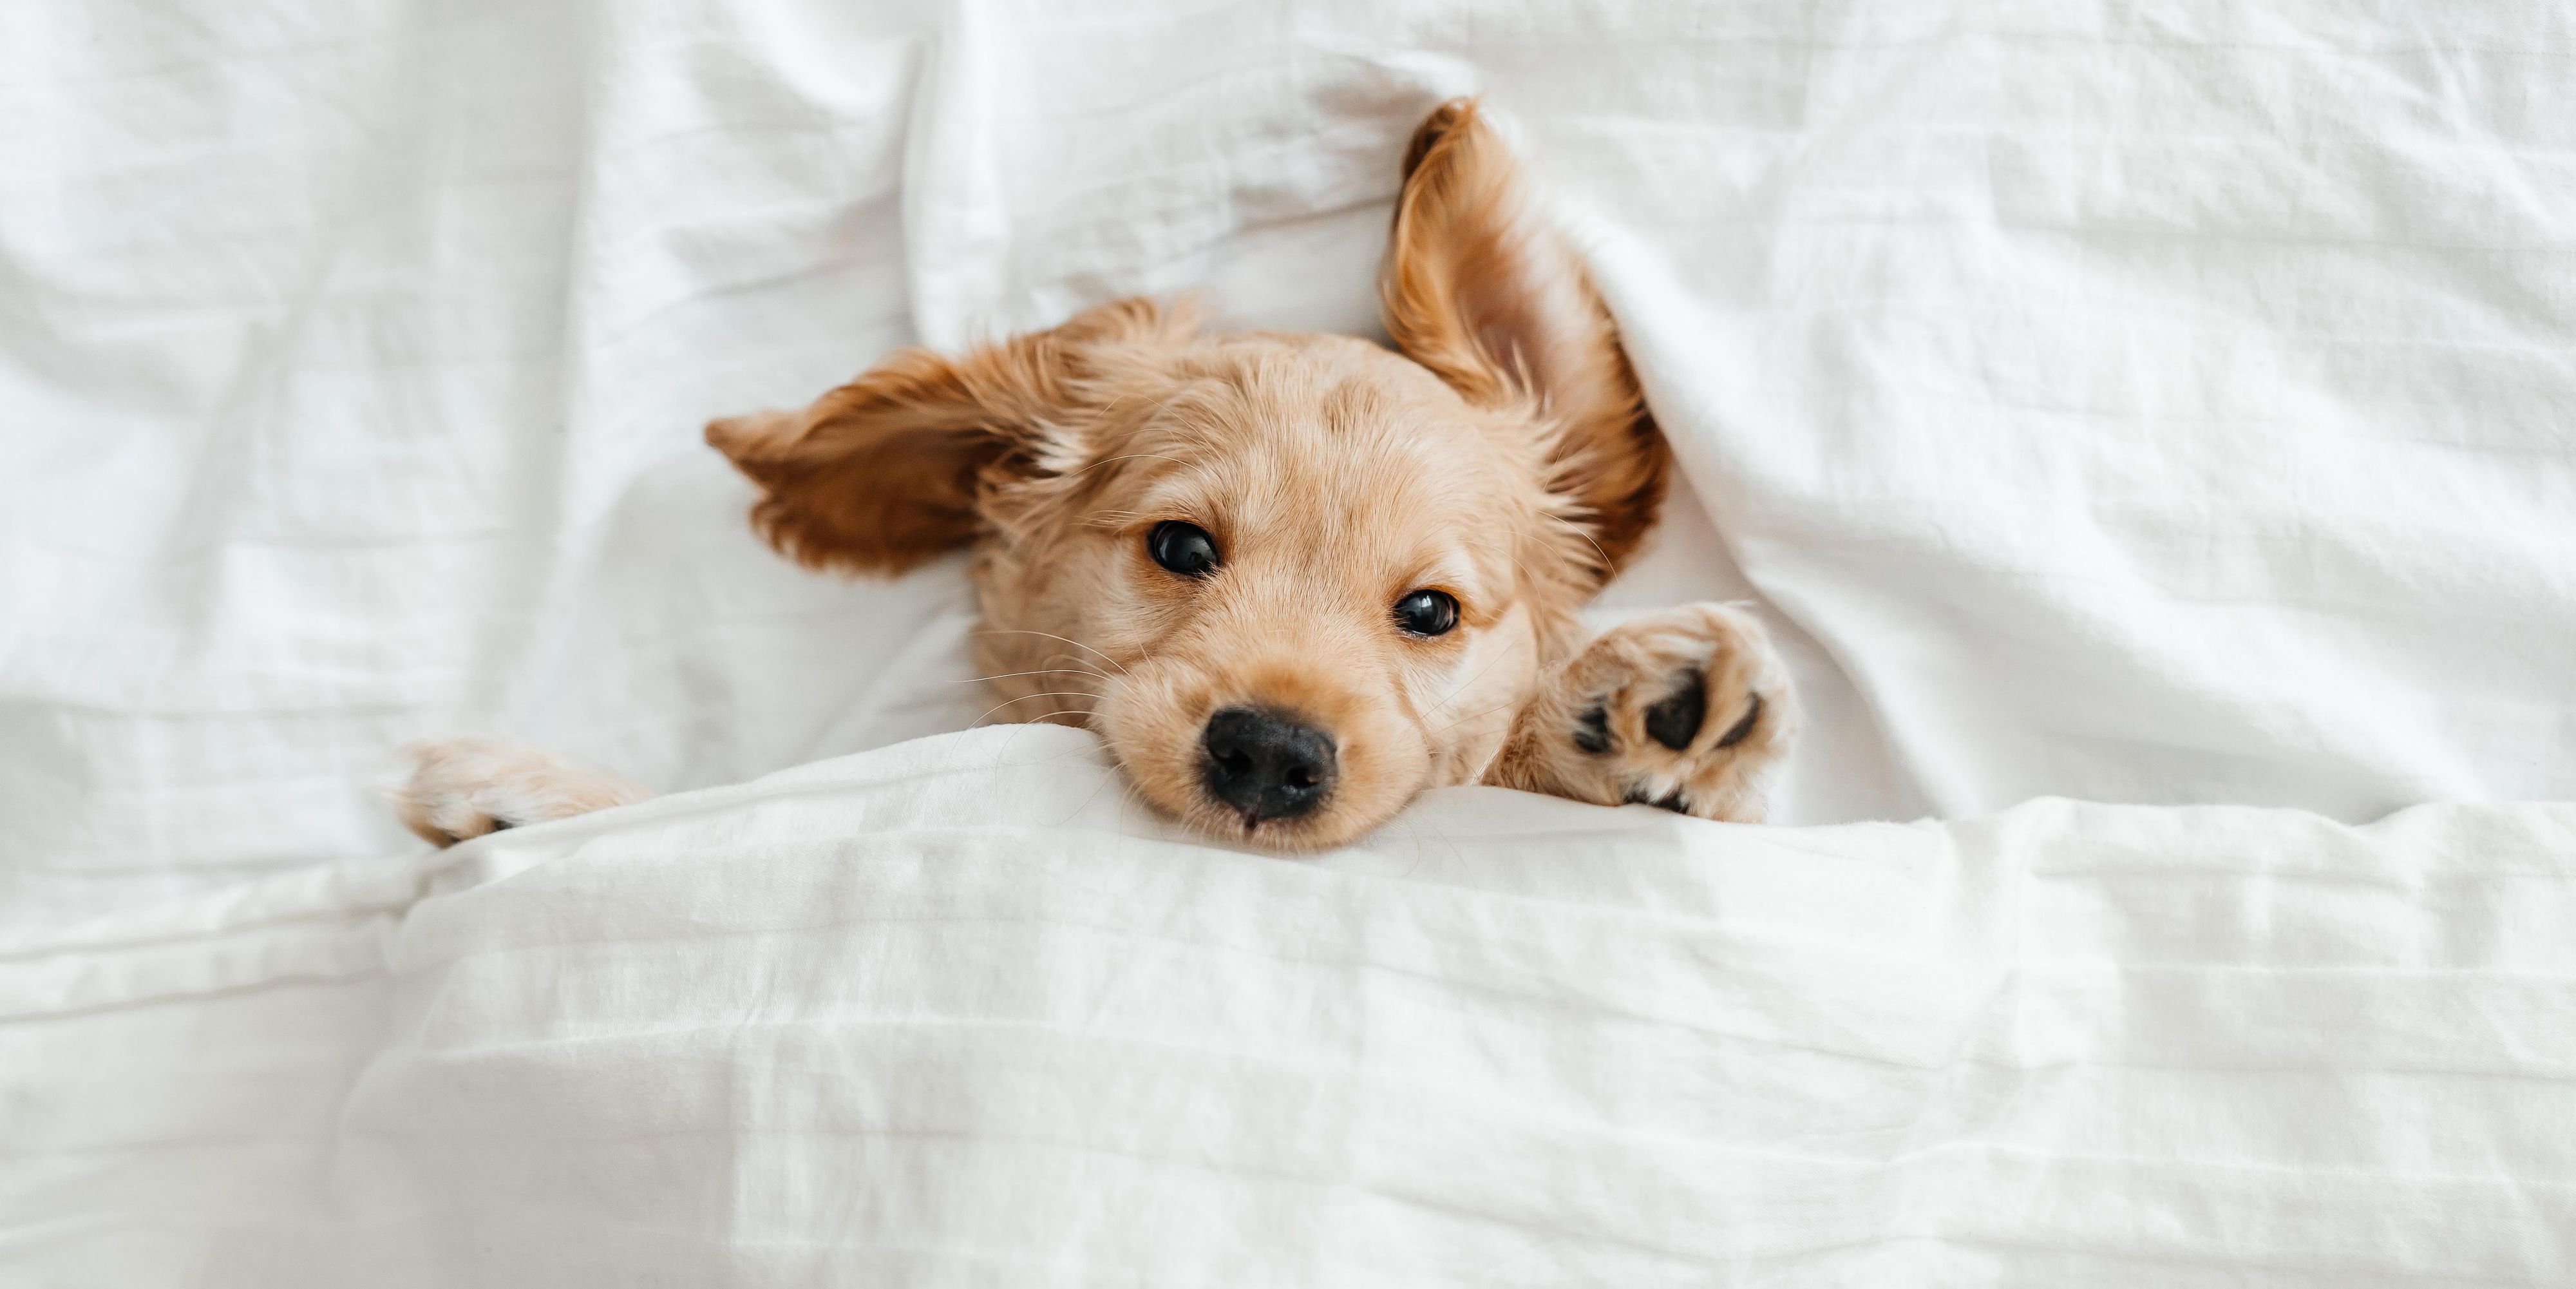 Bring your pup to the Holiday Inn Express and Suites Medford! Our Pet Deposit is $35. We have a 2-dog maximum. Please contact us with any other questions!

